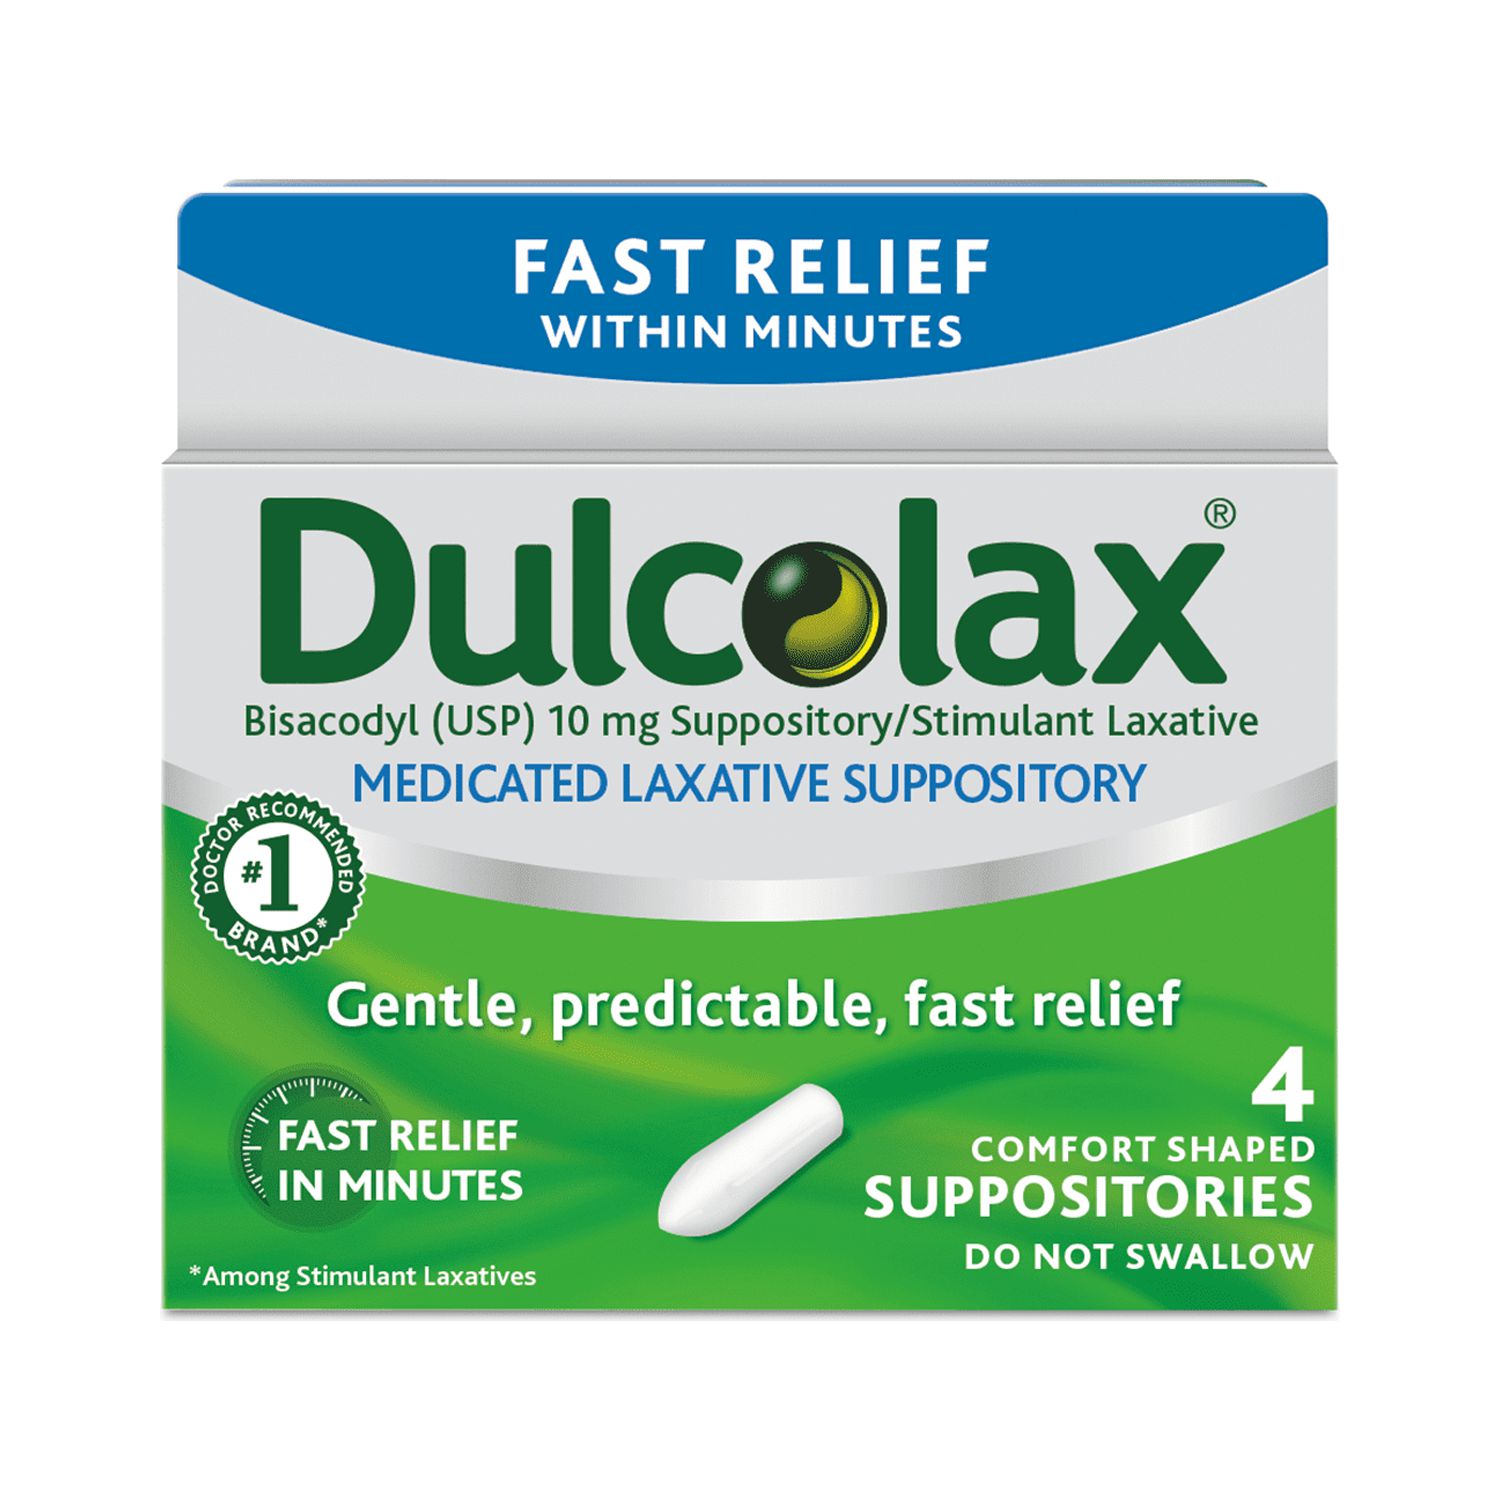 Dulcolax Laxative Suppository for Gentle, Overnight Constipation Relief 4ct - image 1 of 8